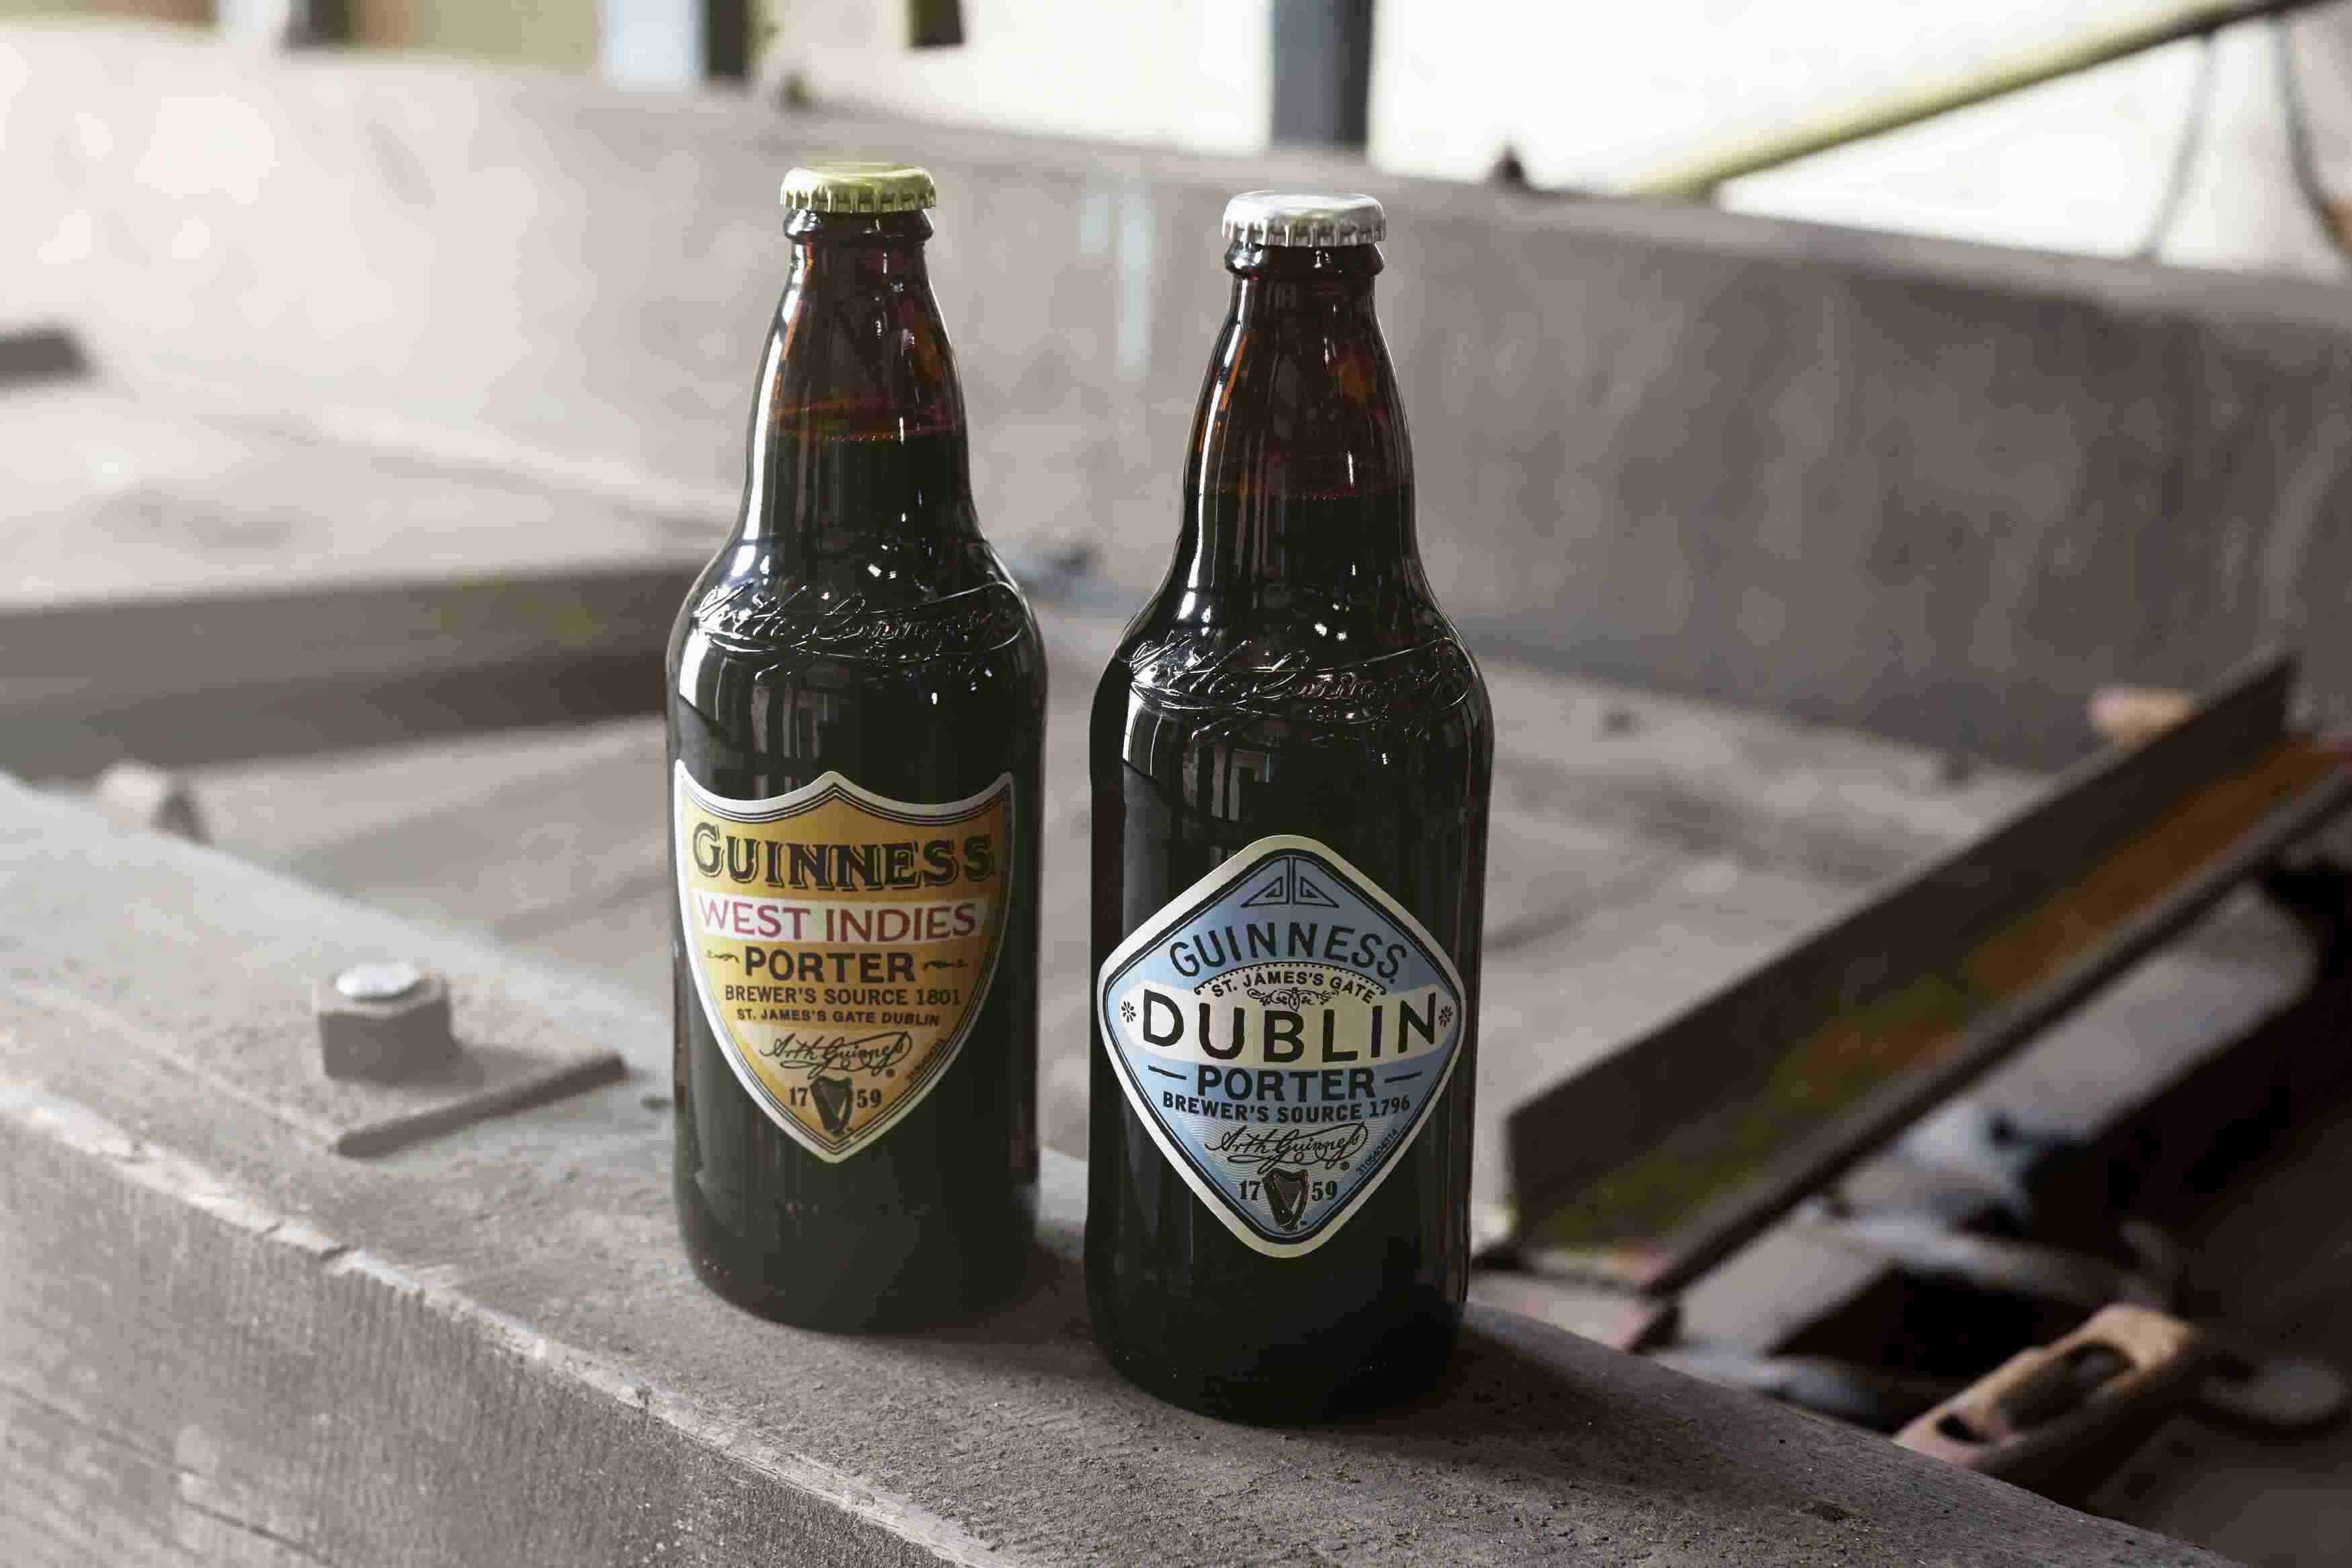 Diageo, the corporate parent and owner of the St James’s Gate brewery, has launched a range of new products using the Guinness brand to reach a whole new customer base.